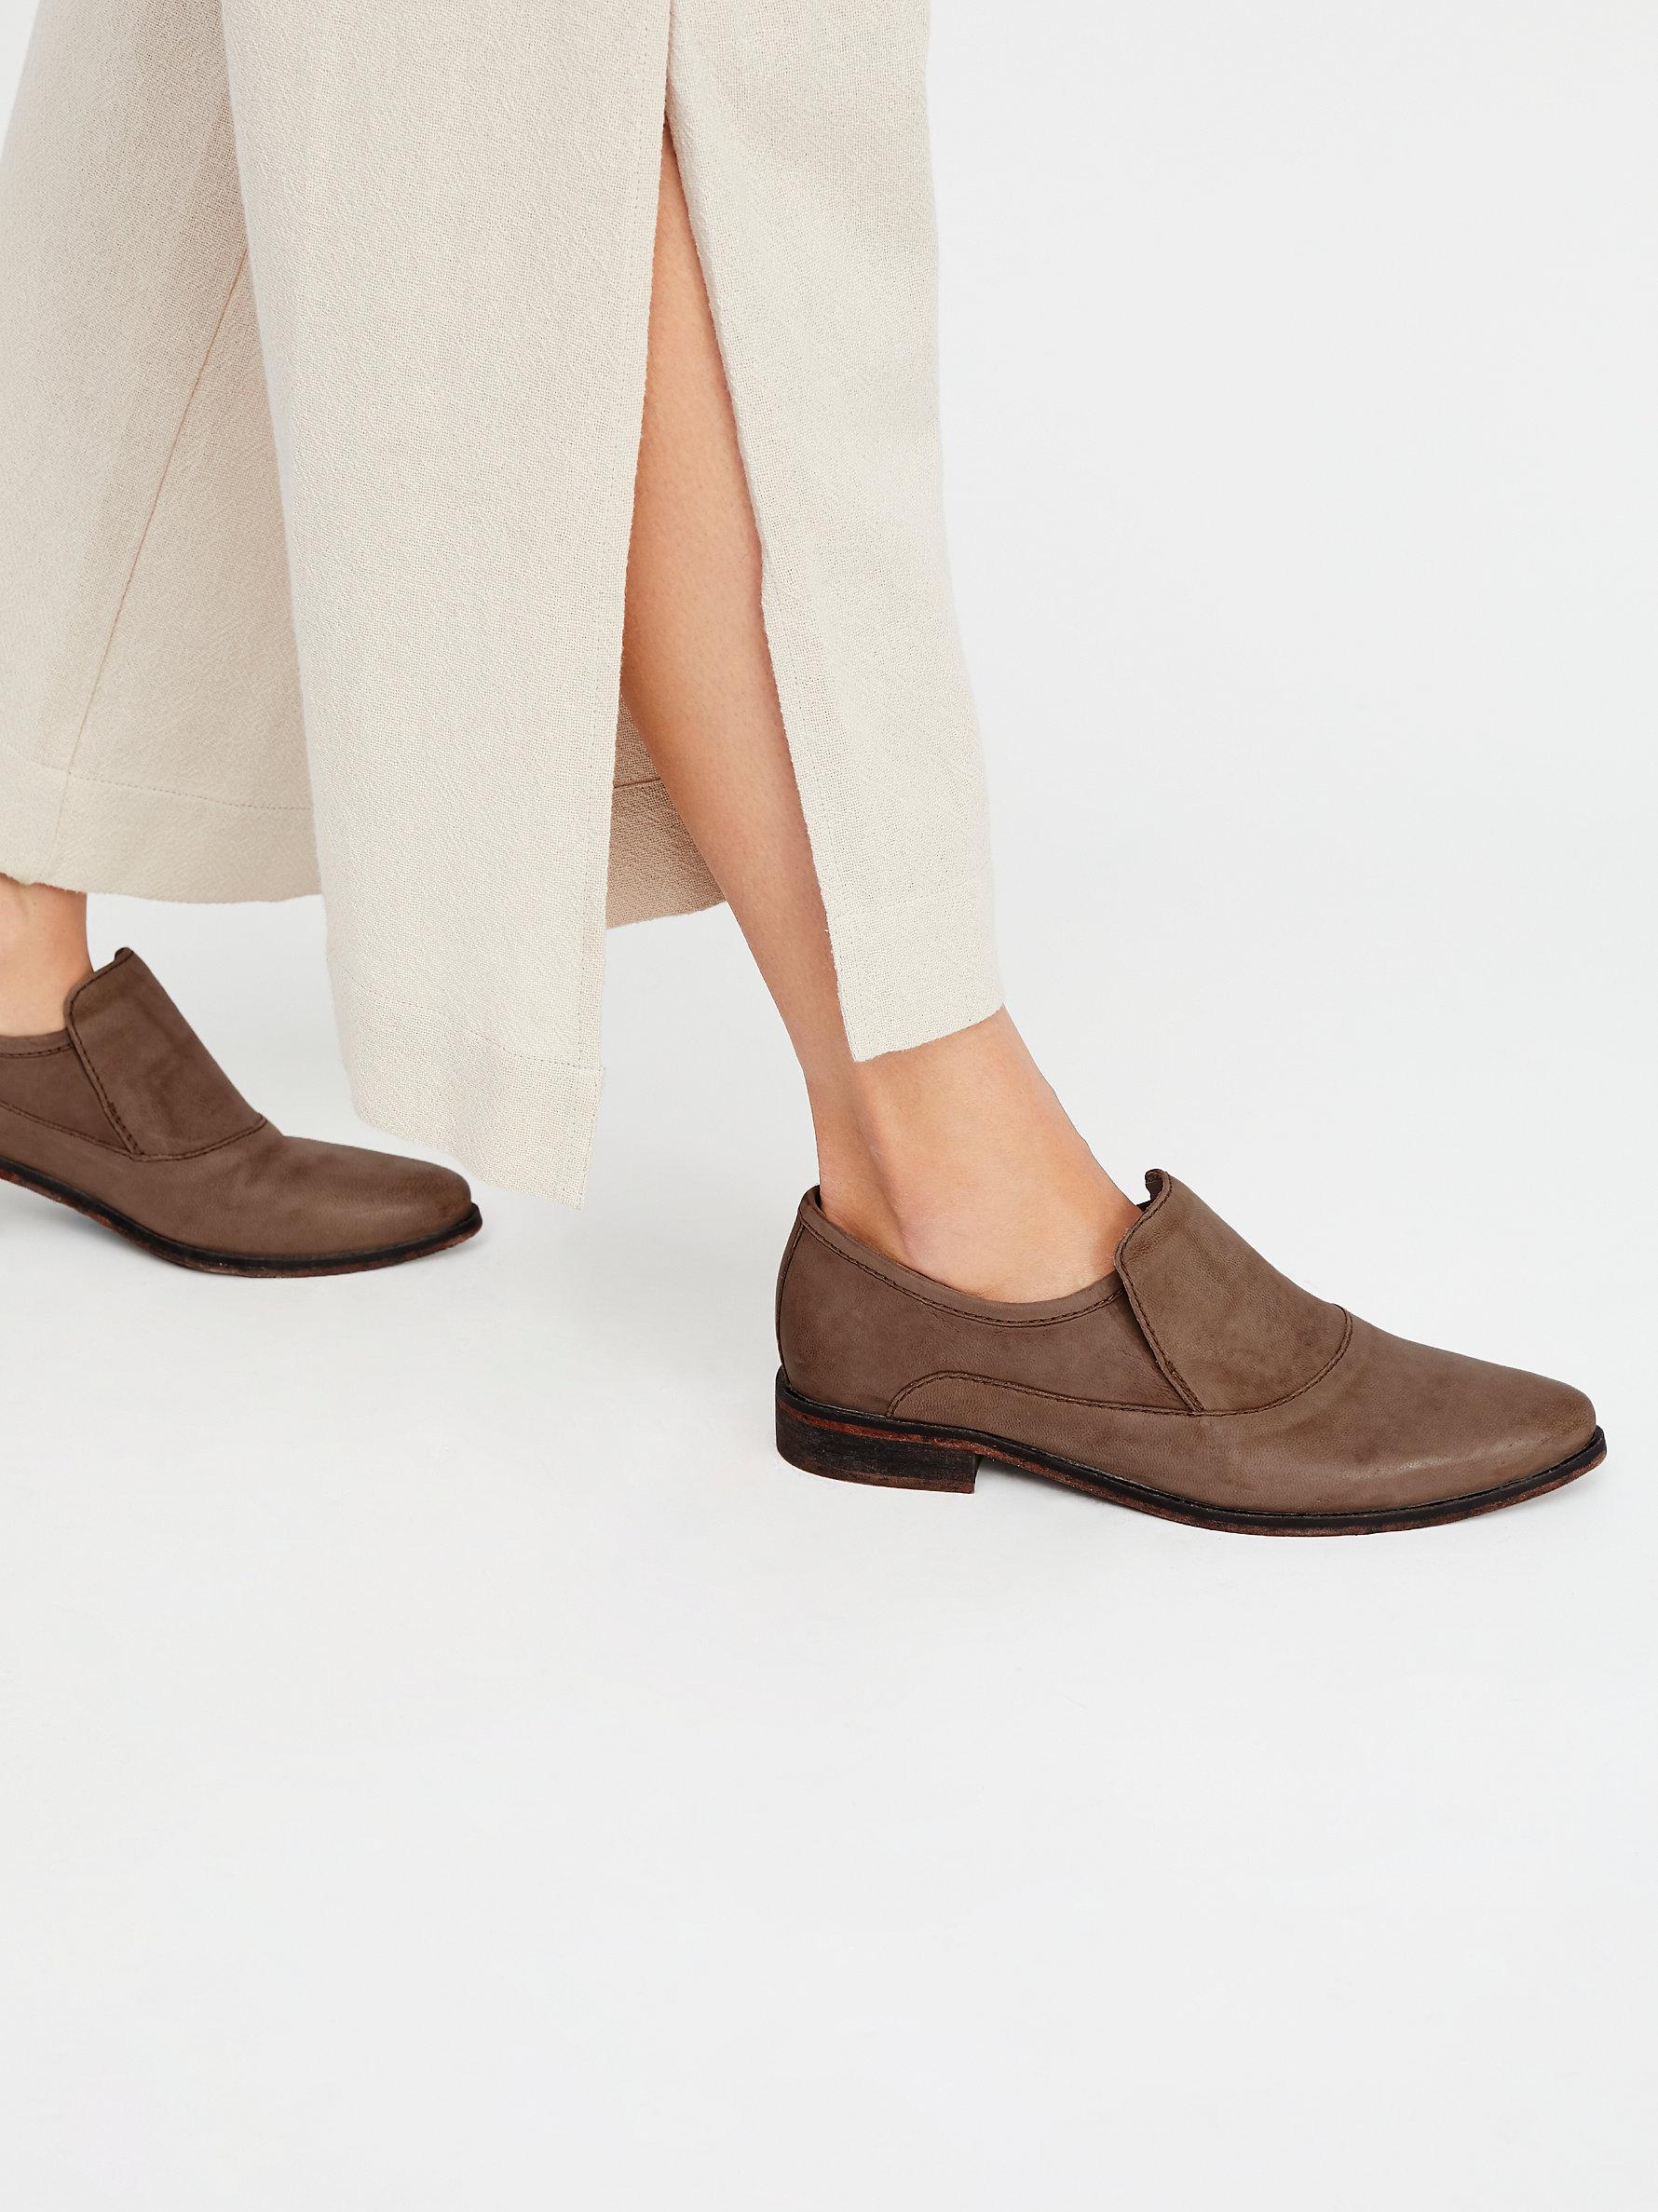 Leather Brady Slip On Loafer in Brown 